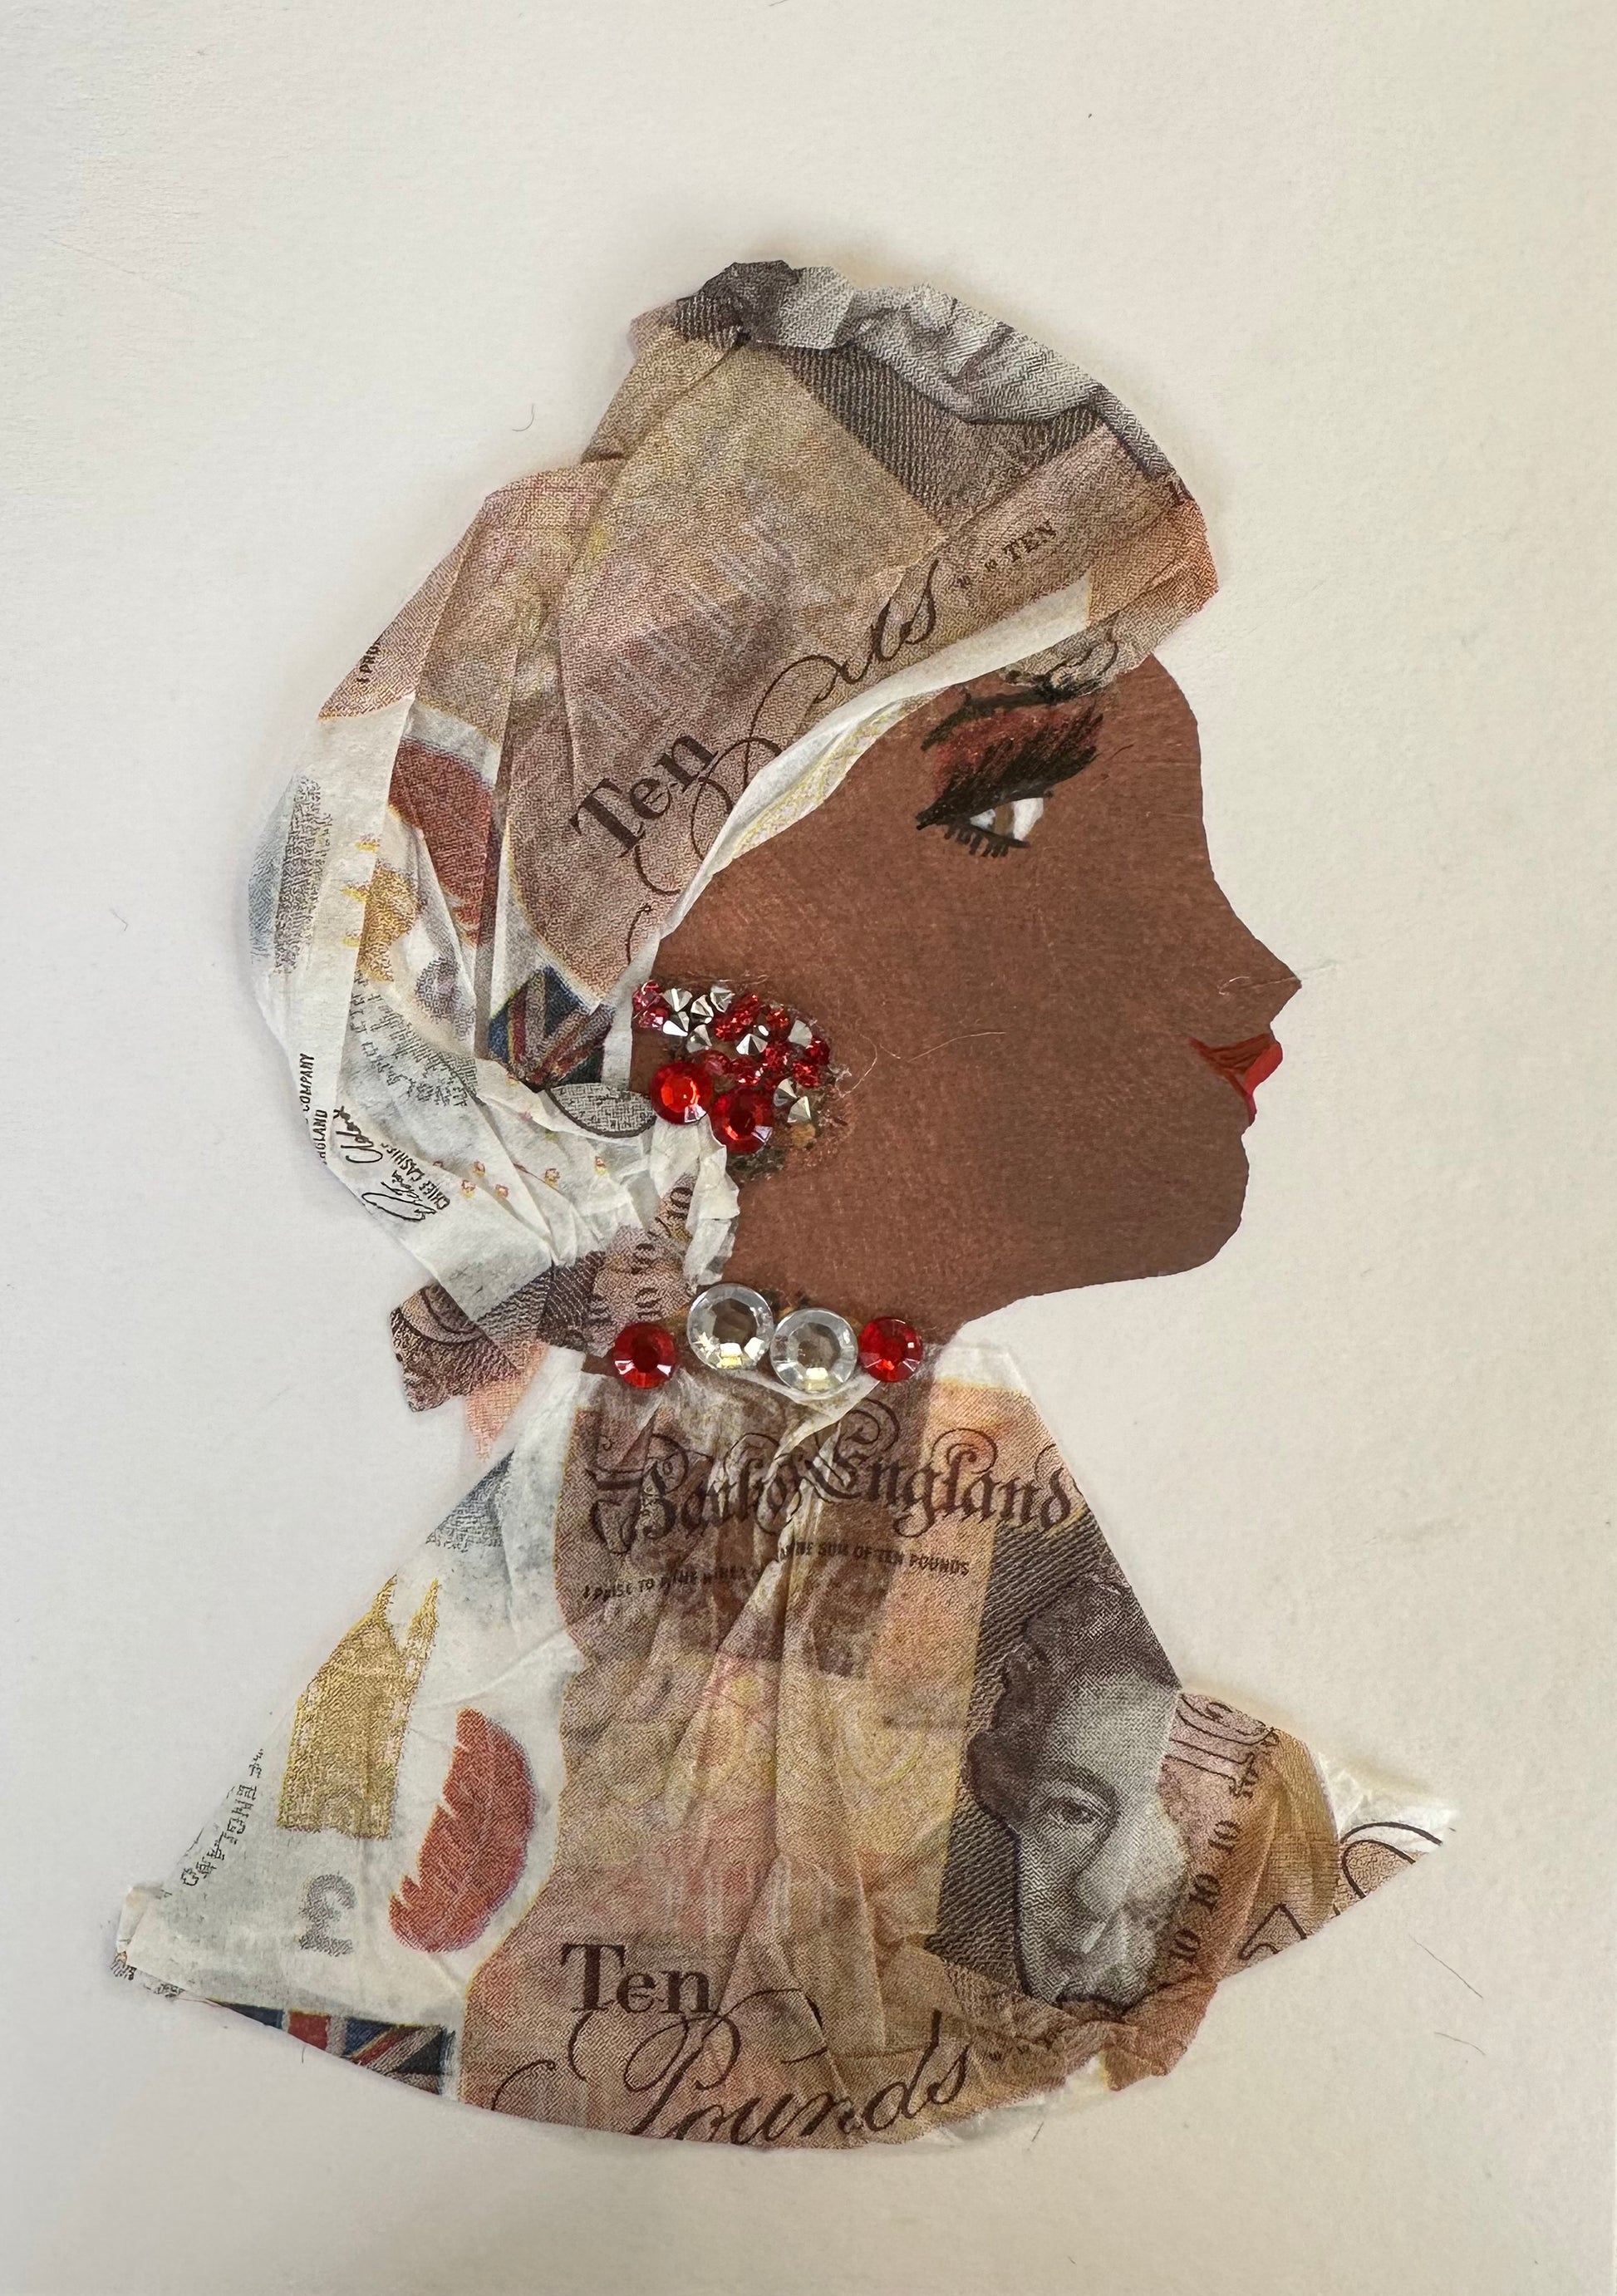 I designed this handmade card of a woman dressed in a paper material hatinator and blouse that have ten pound pattern printed on it. The outfit is completed with silver and red gemstones for her jewellery.